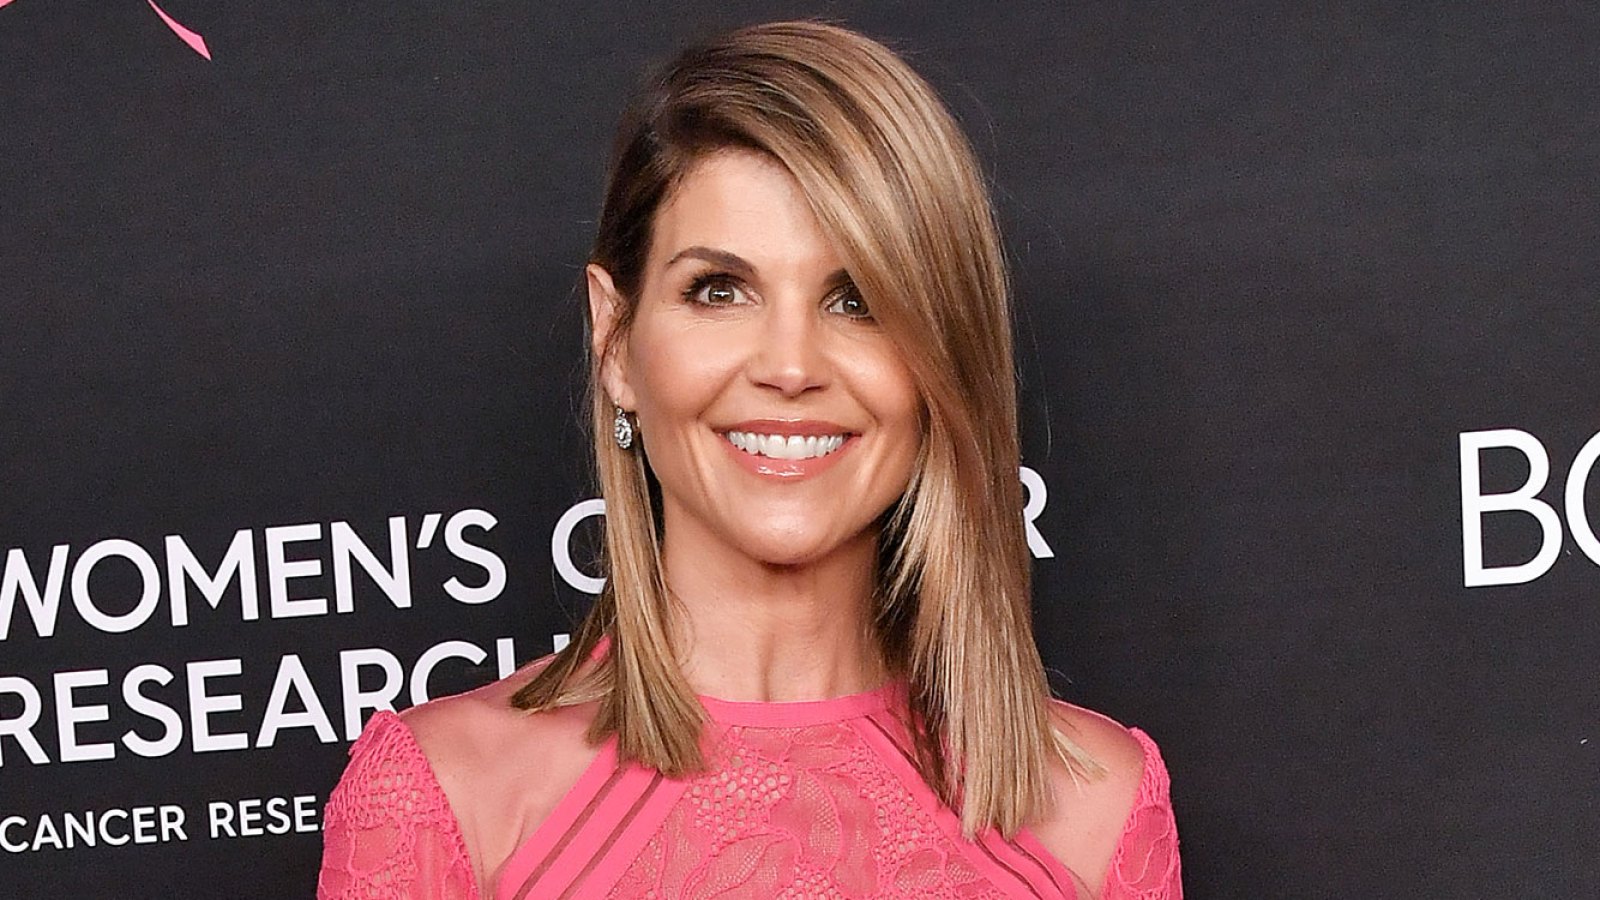 Lori Loughlin Is 'Thrilled' to Return to 'What She Loves' on 'When Hope Calls' Season 2